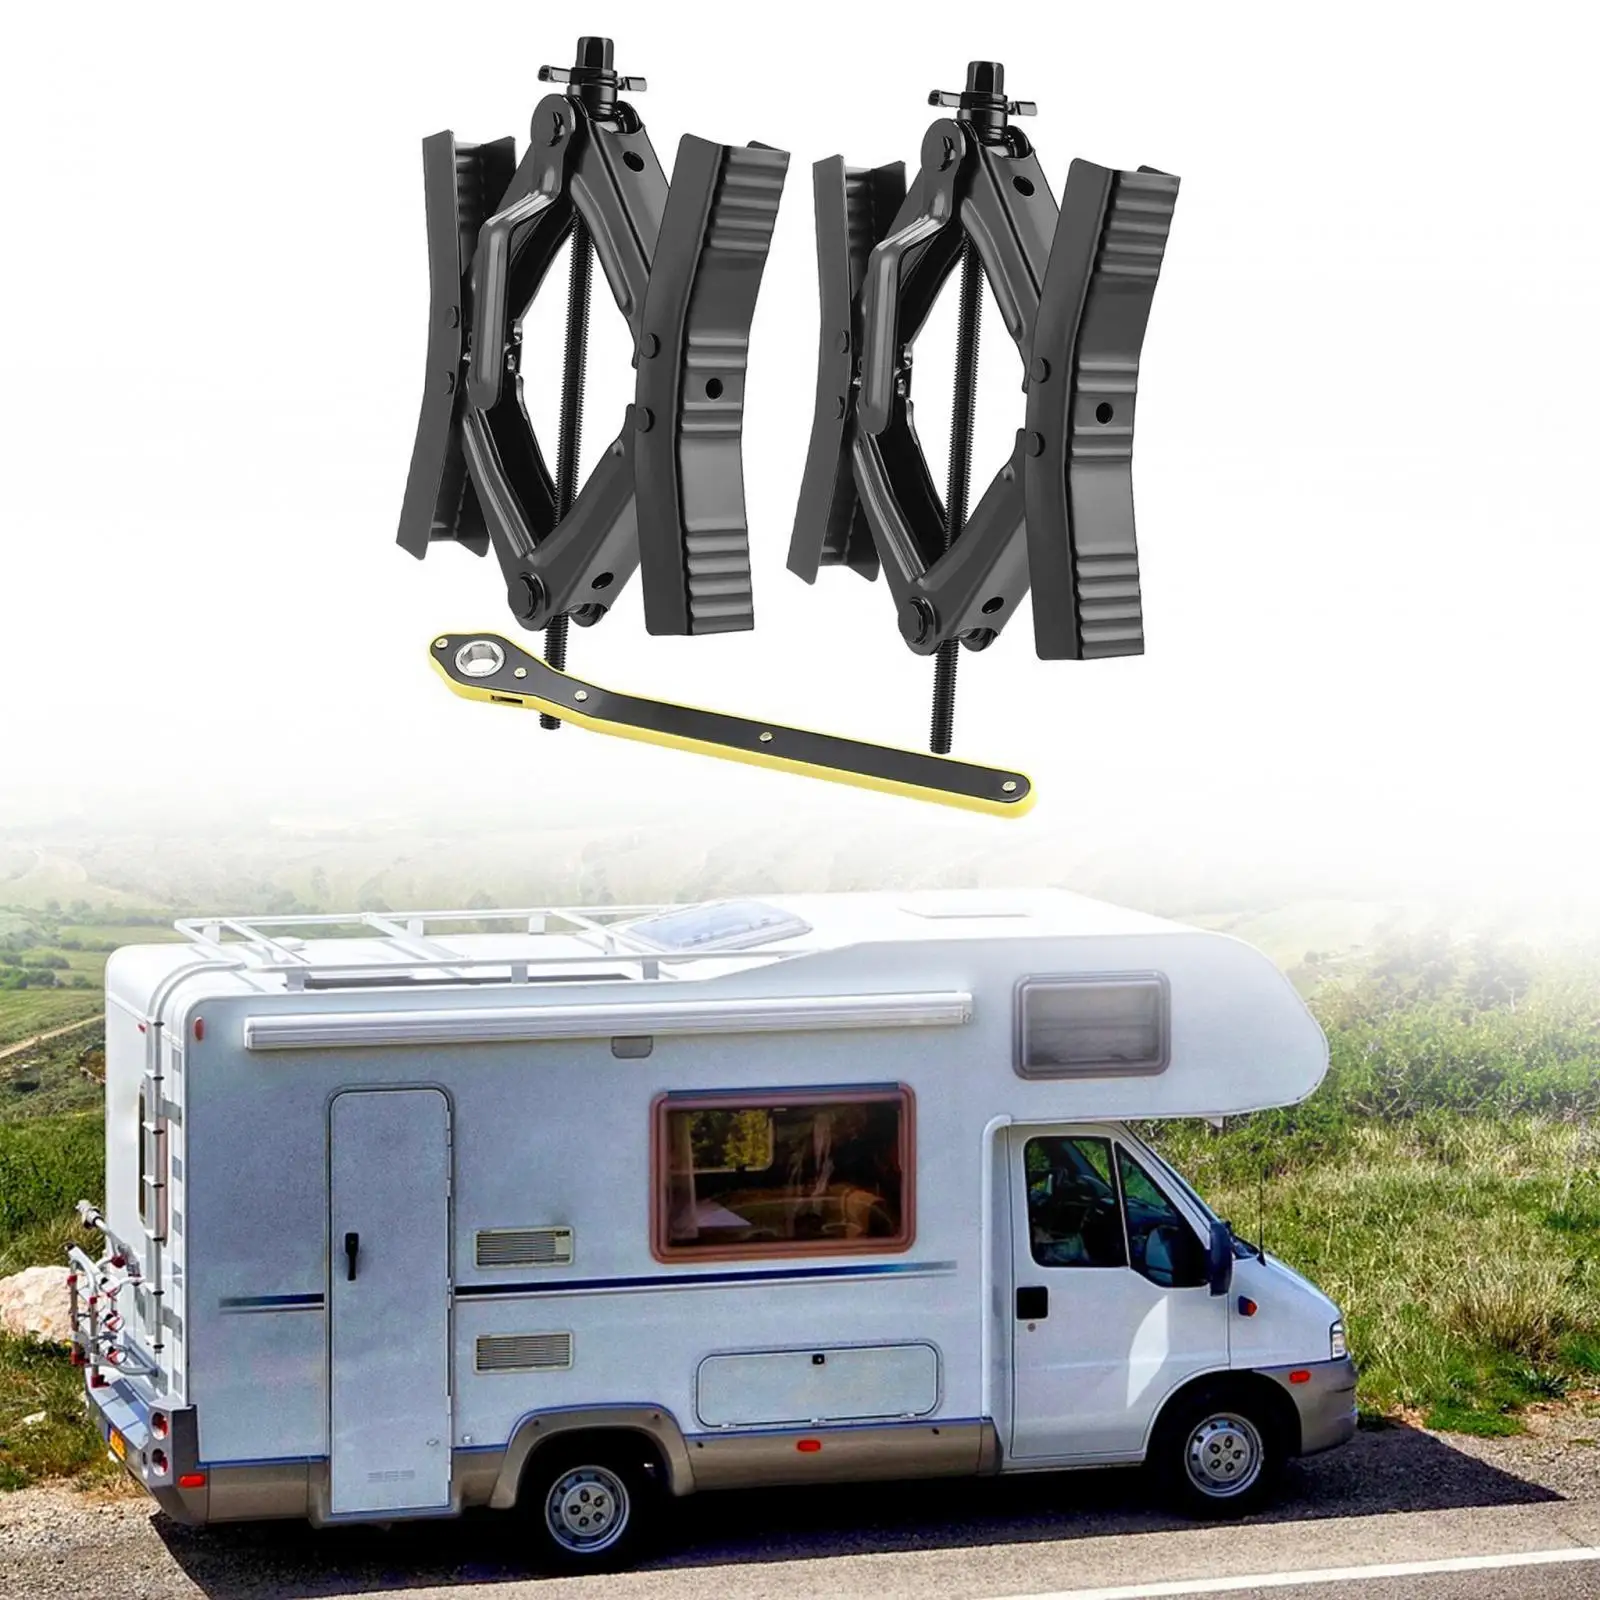 2Pcs Camper Wheel Chock Stabilizers Scissor Parts Replacement Trailer Scissor Lock for Picnic Camping Trailers BBQ RV Outdoor